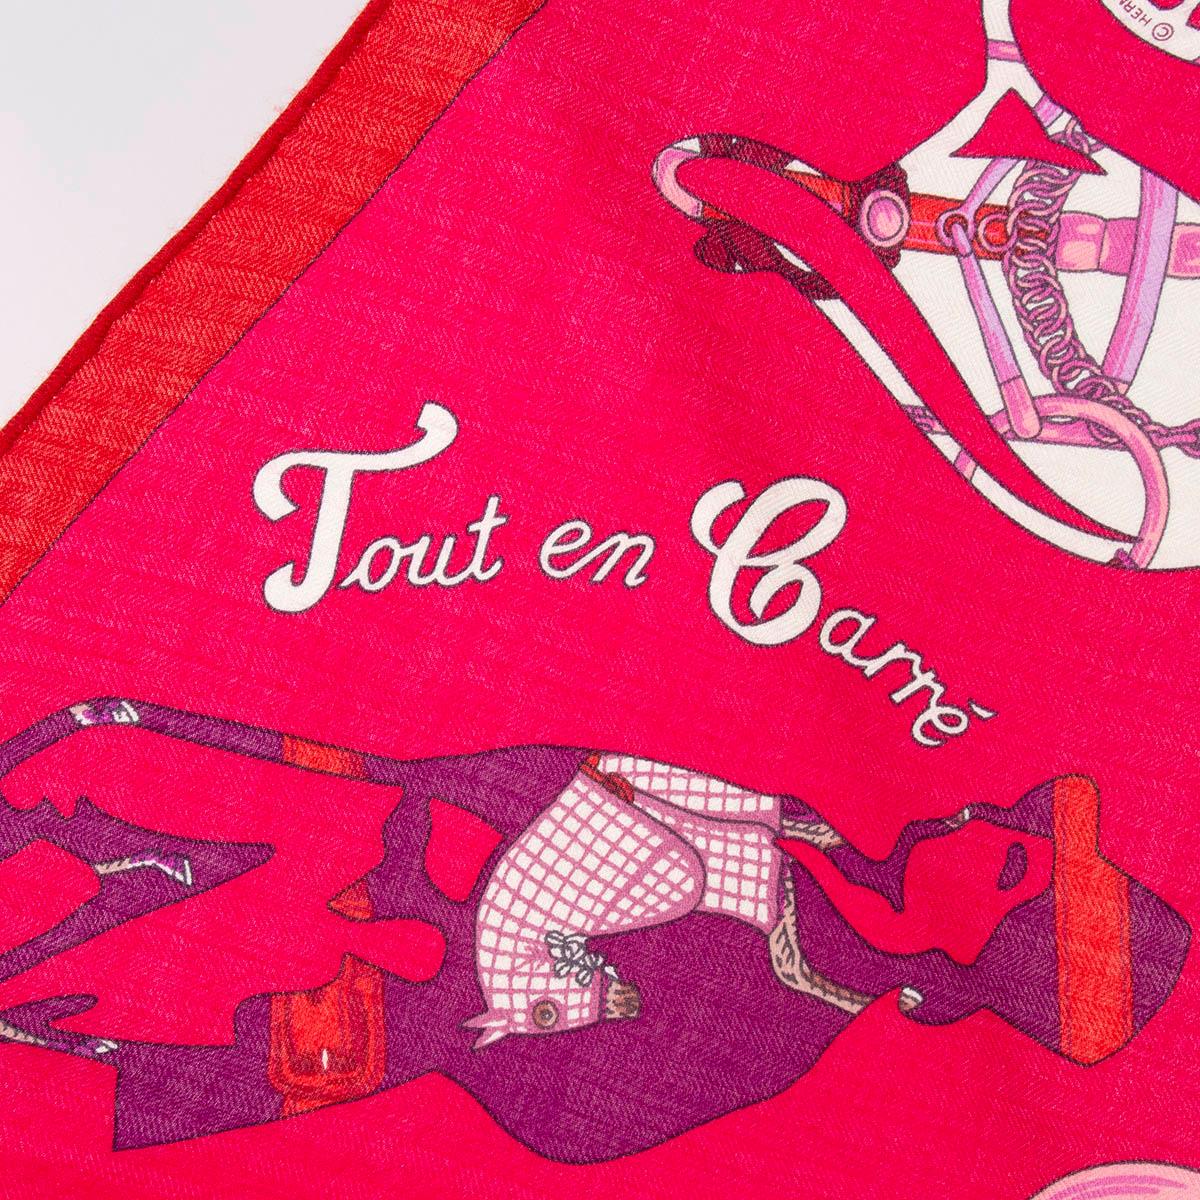 100% authentic Hermès Tout en Carre Losange scarf in pink, red, white and purple cashmere (70%) and silk (30%). Missing tag. Has been worn and is in excellent condition. Comes with box. 

Measurements
Width	50cm (19.5in)
Length	126cm (49.1in)

All